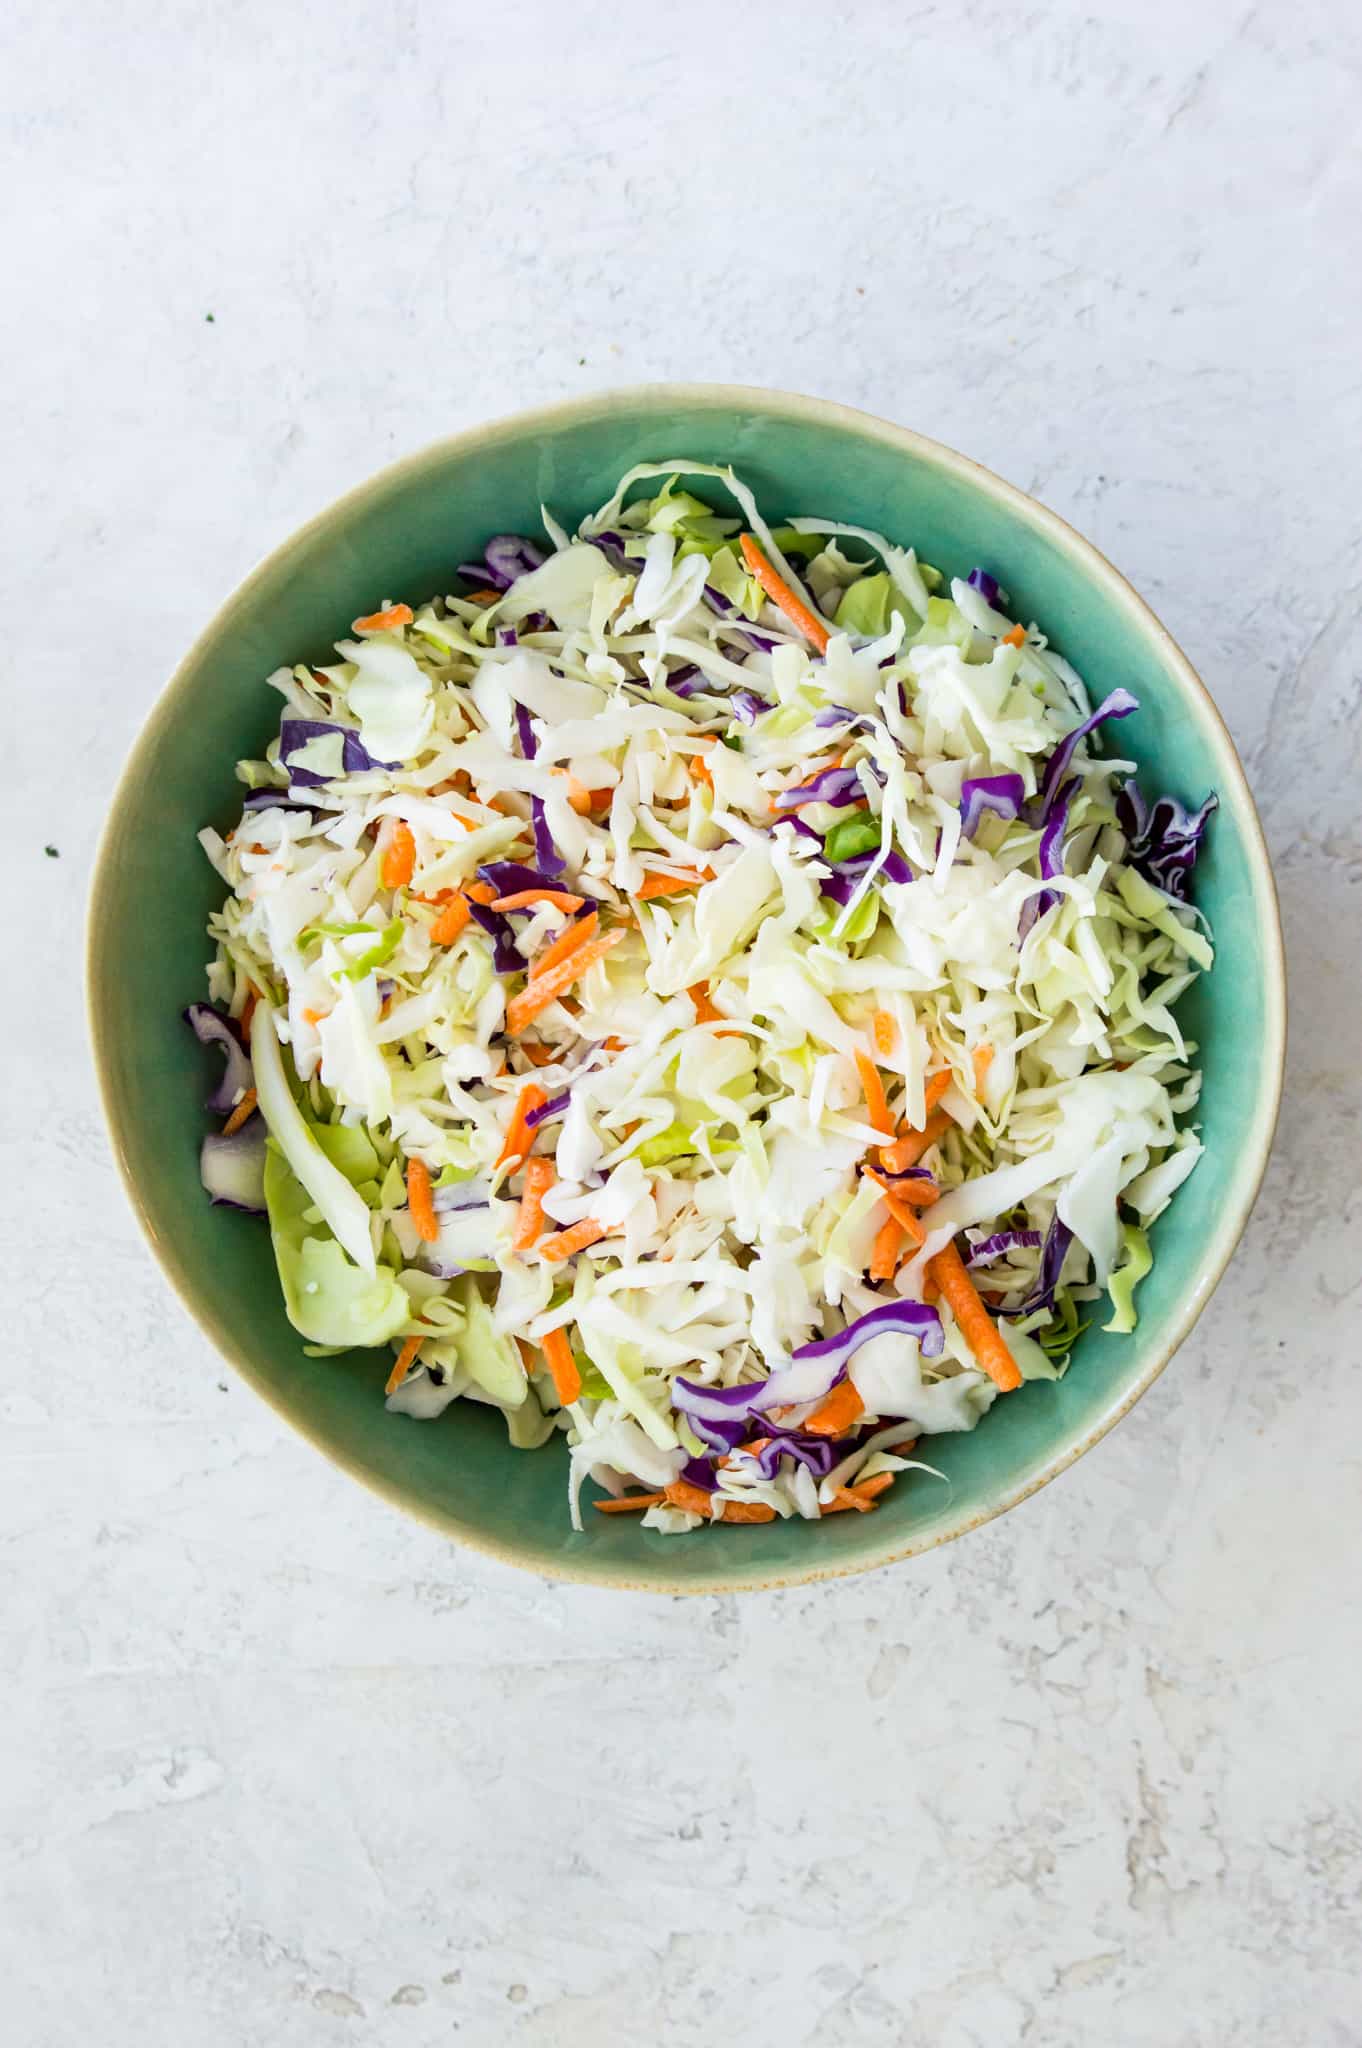 A bowl of shredded cabbage.